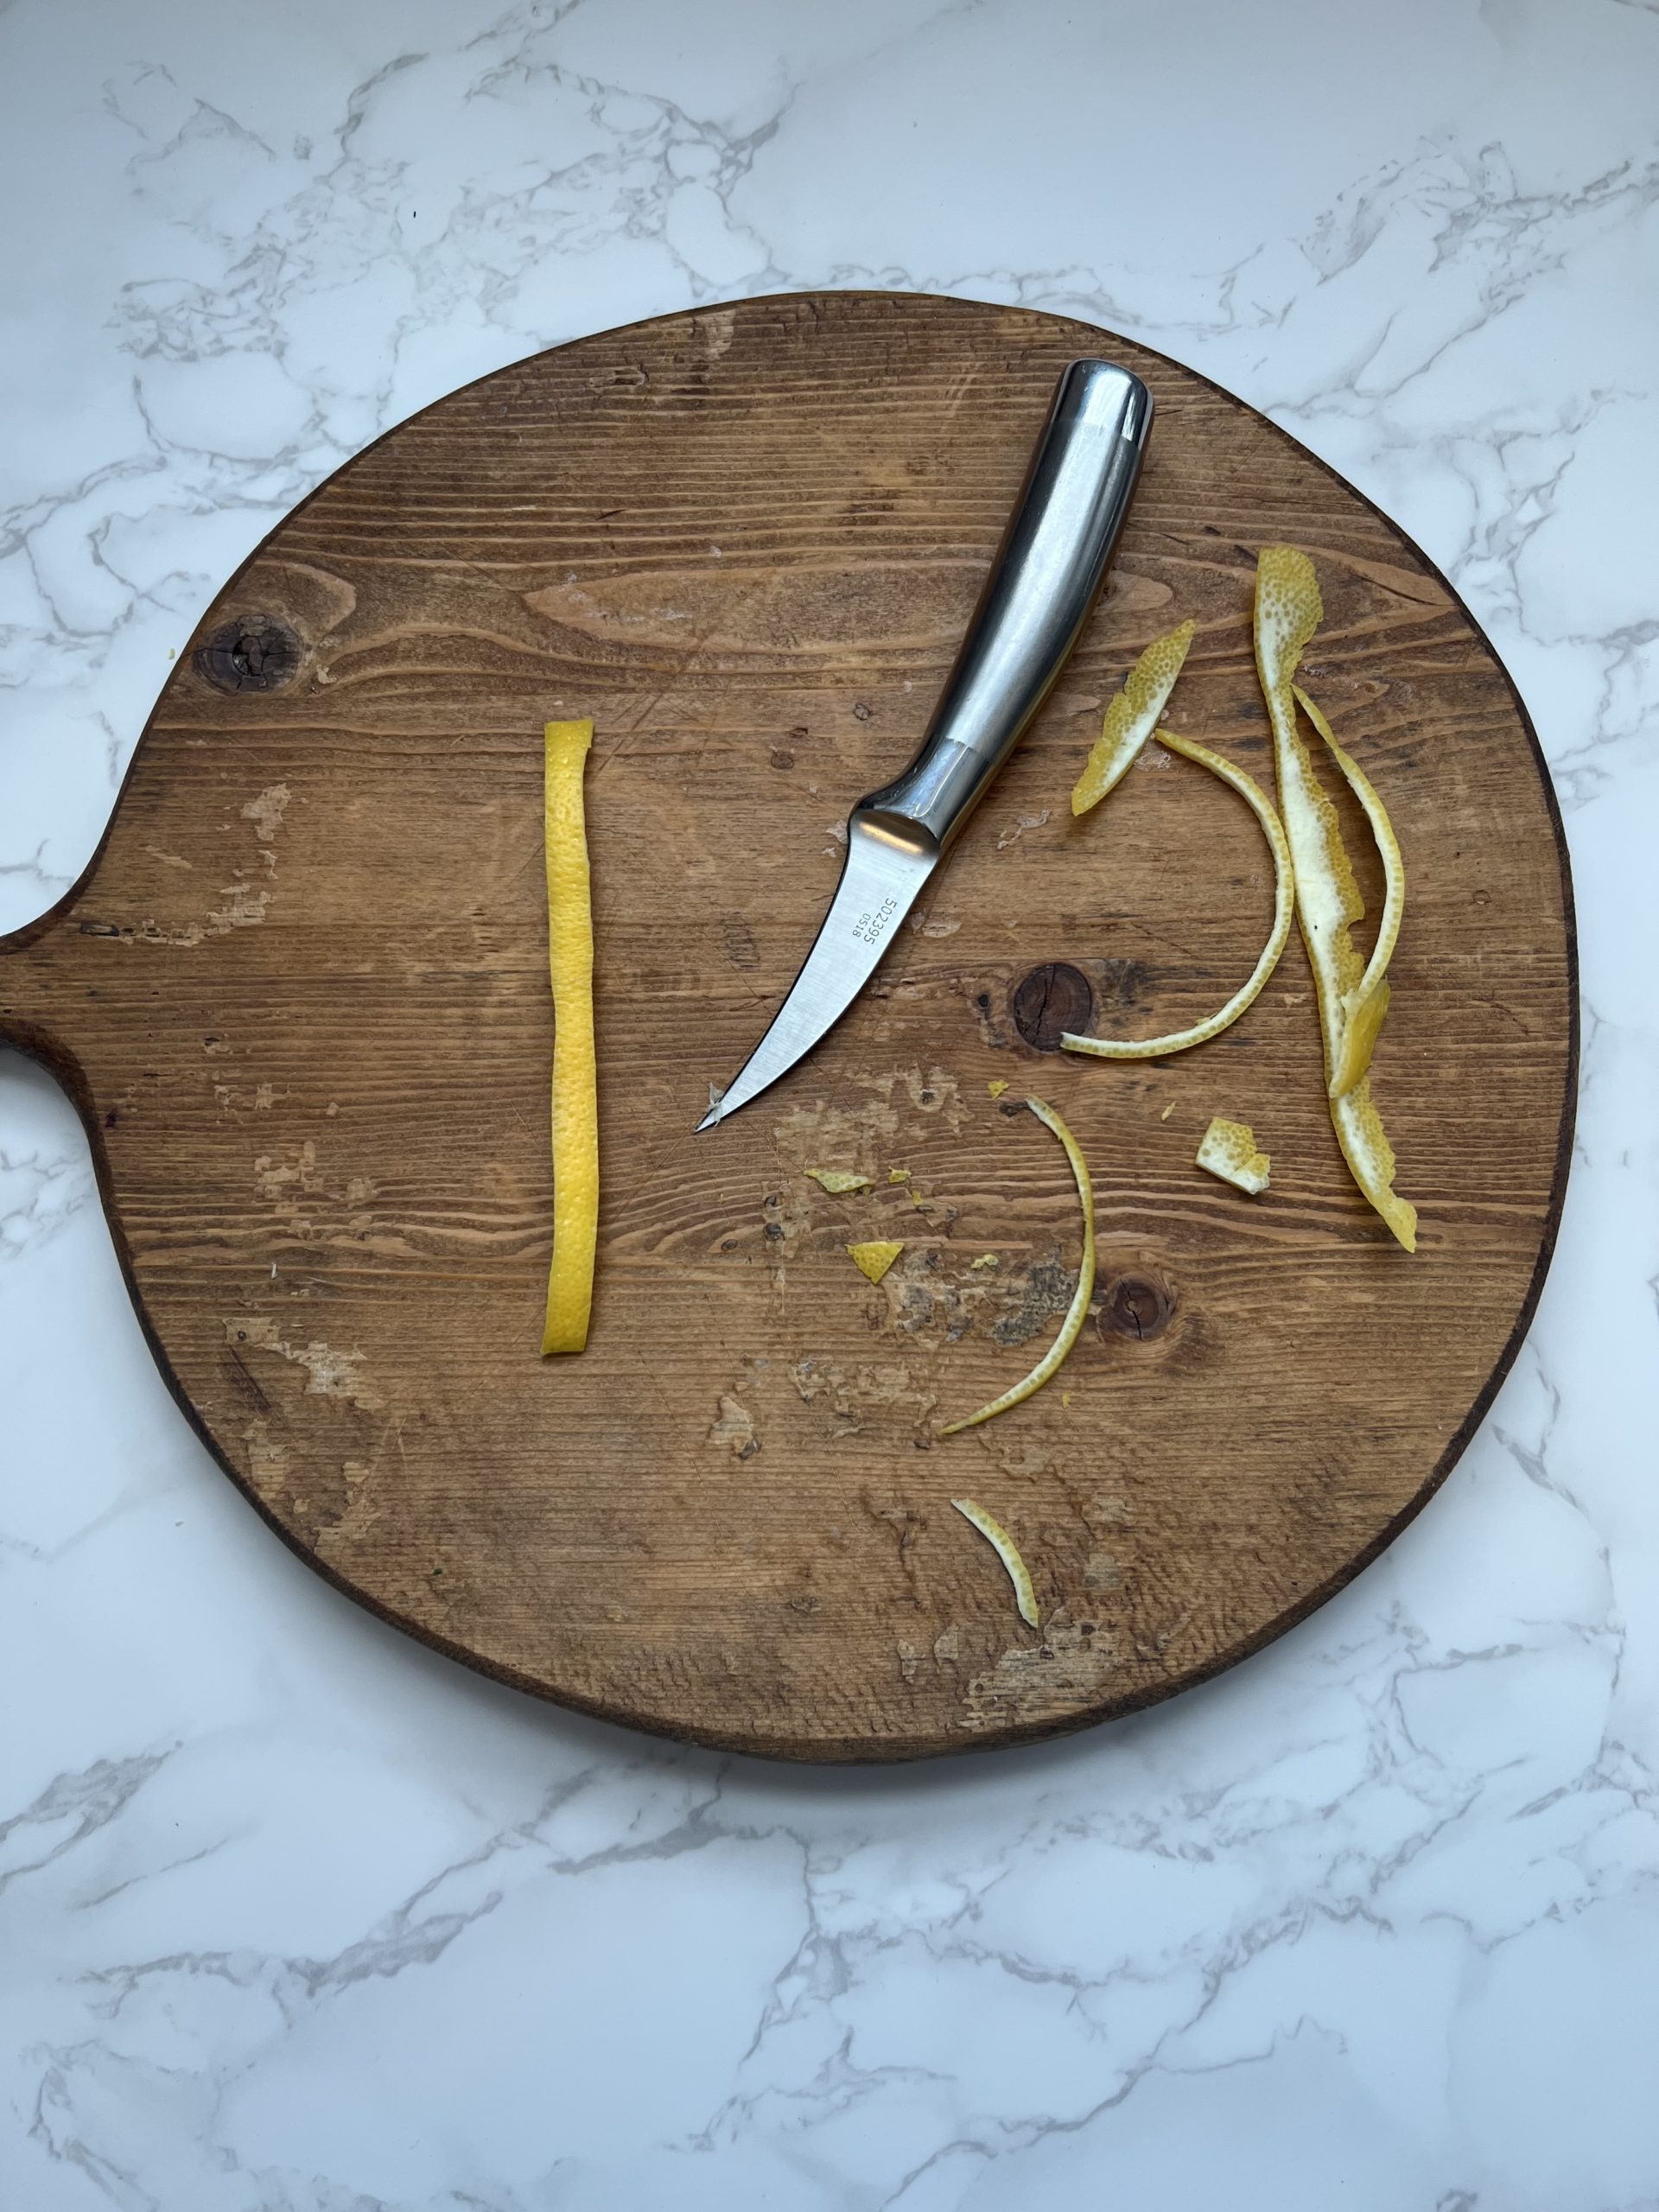 A uniform, trimmed lemon ribbon with a knife and trimmed off pieces of the lemon peel on a cutting board.